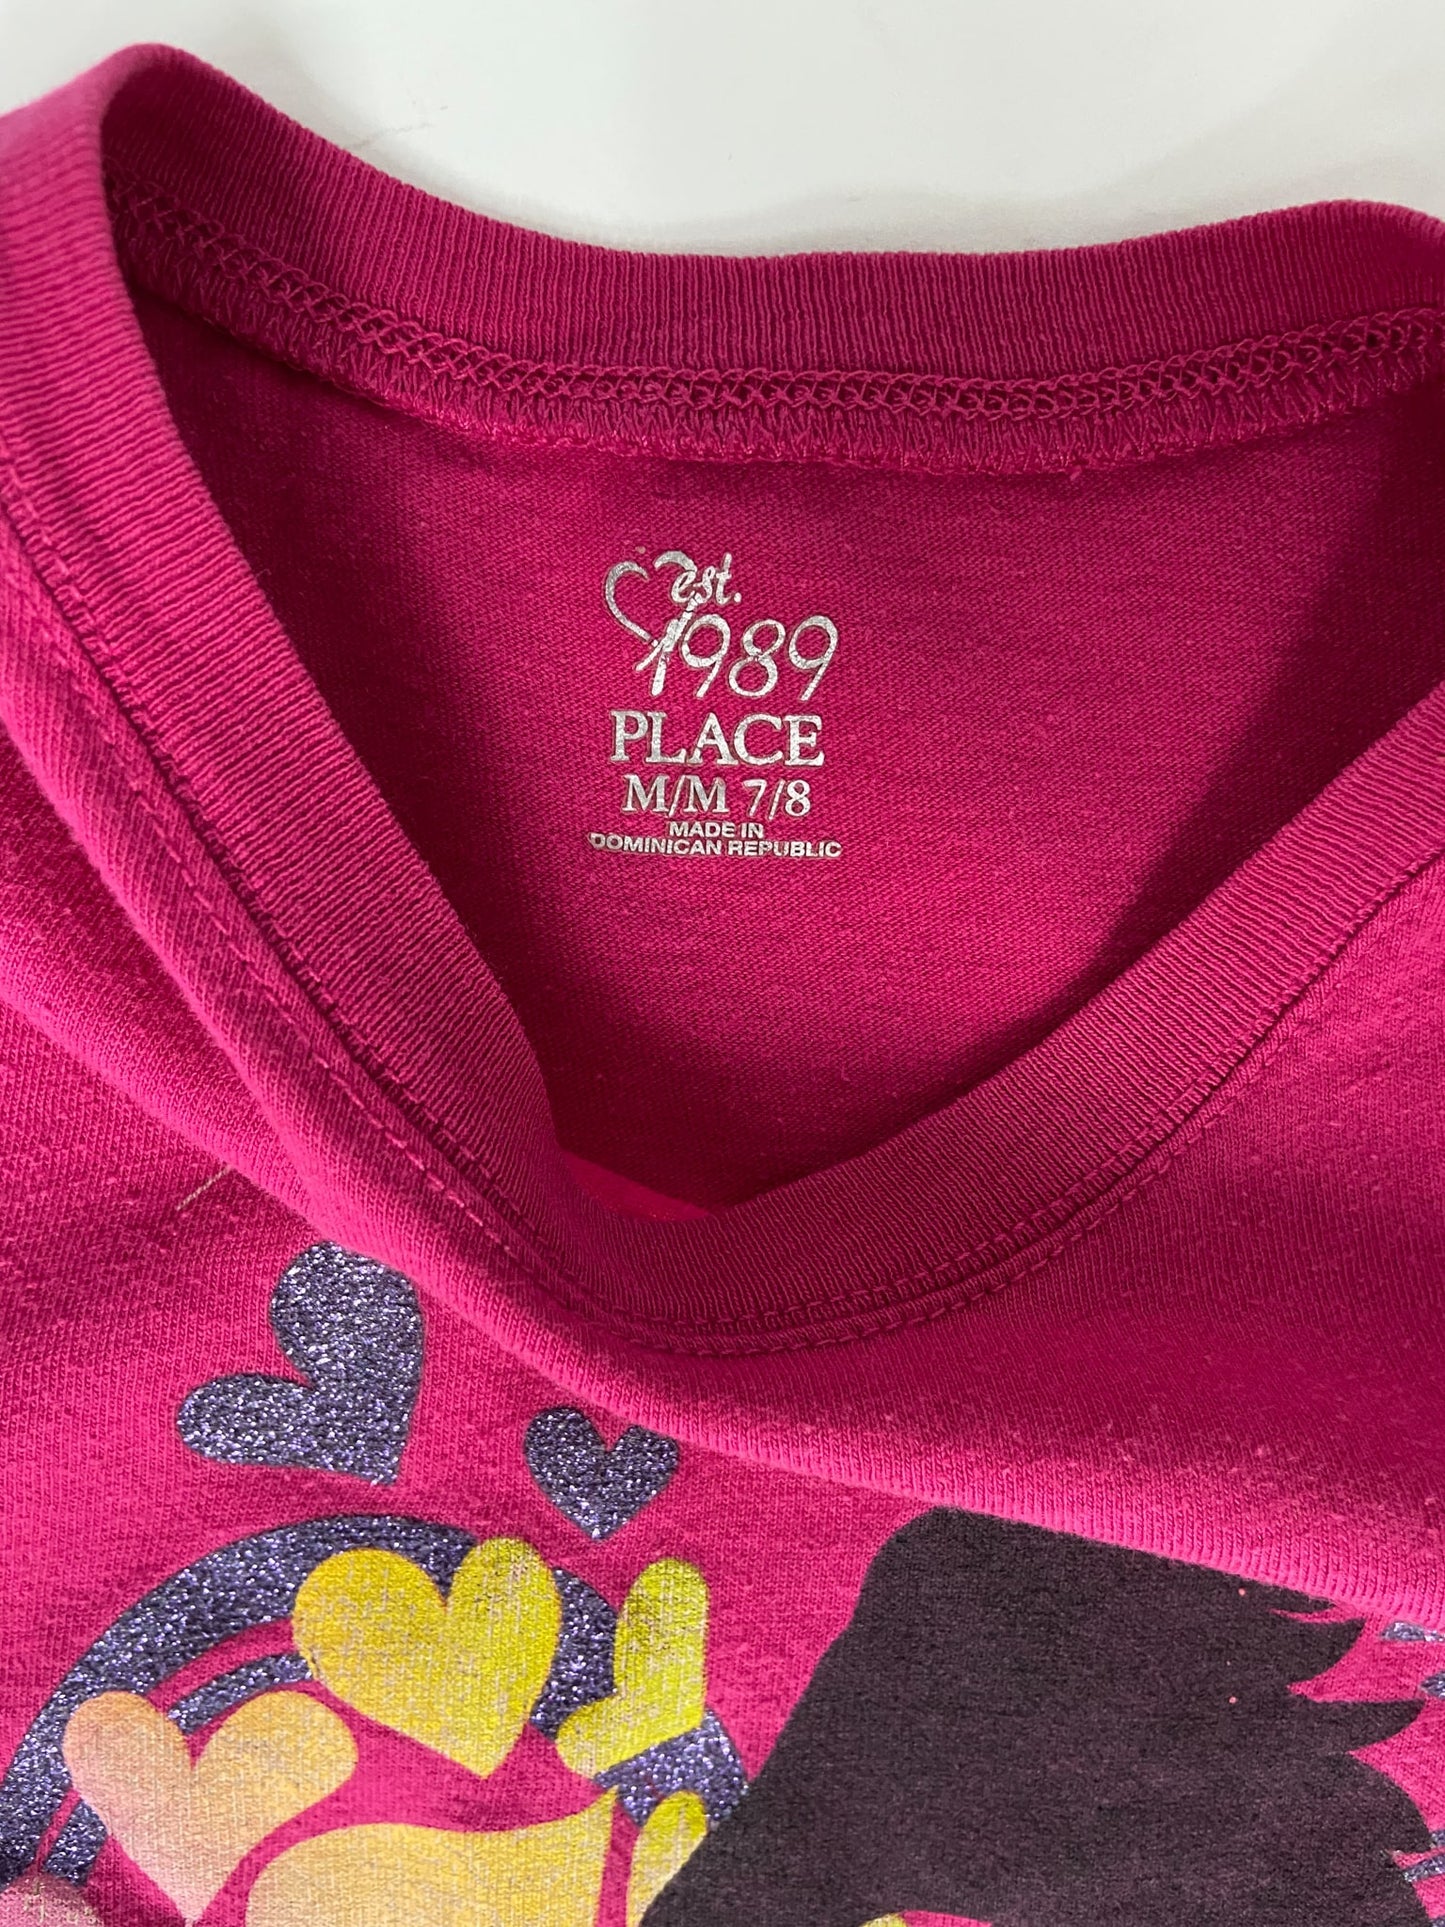 The Children's Place Long Sleeve Shirt - Pink - Youth Medium